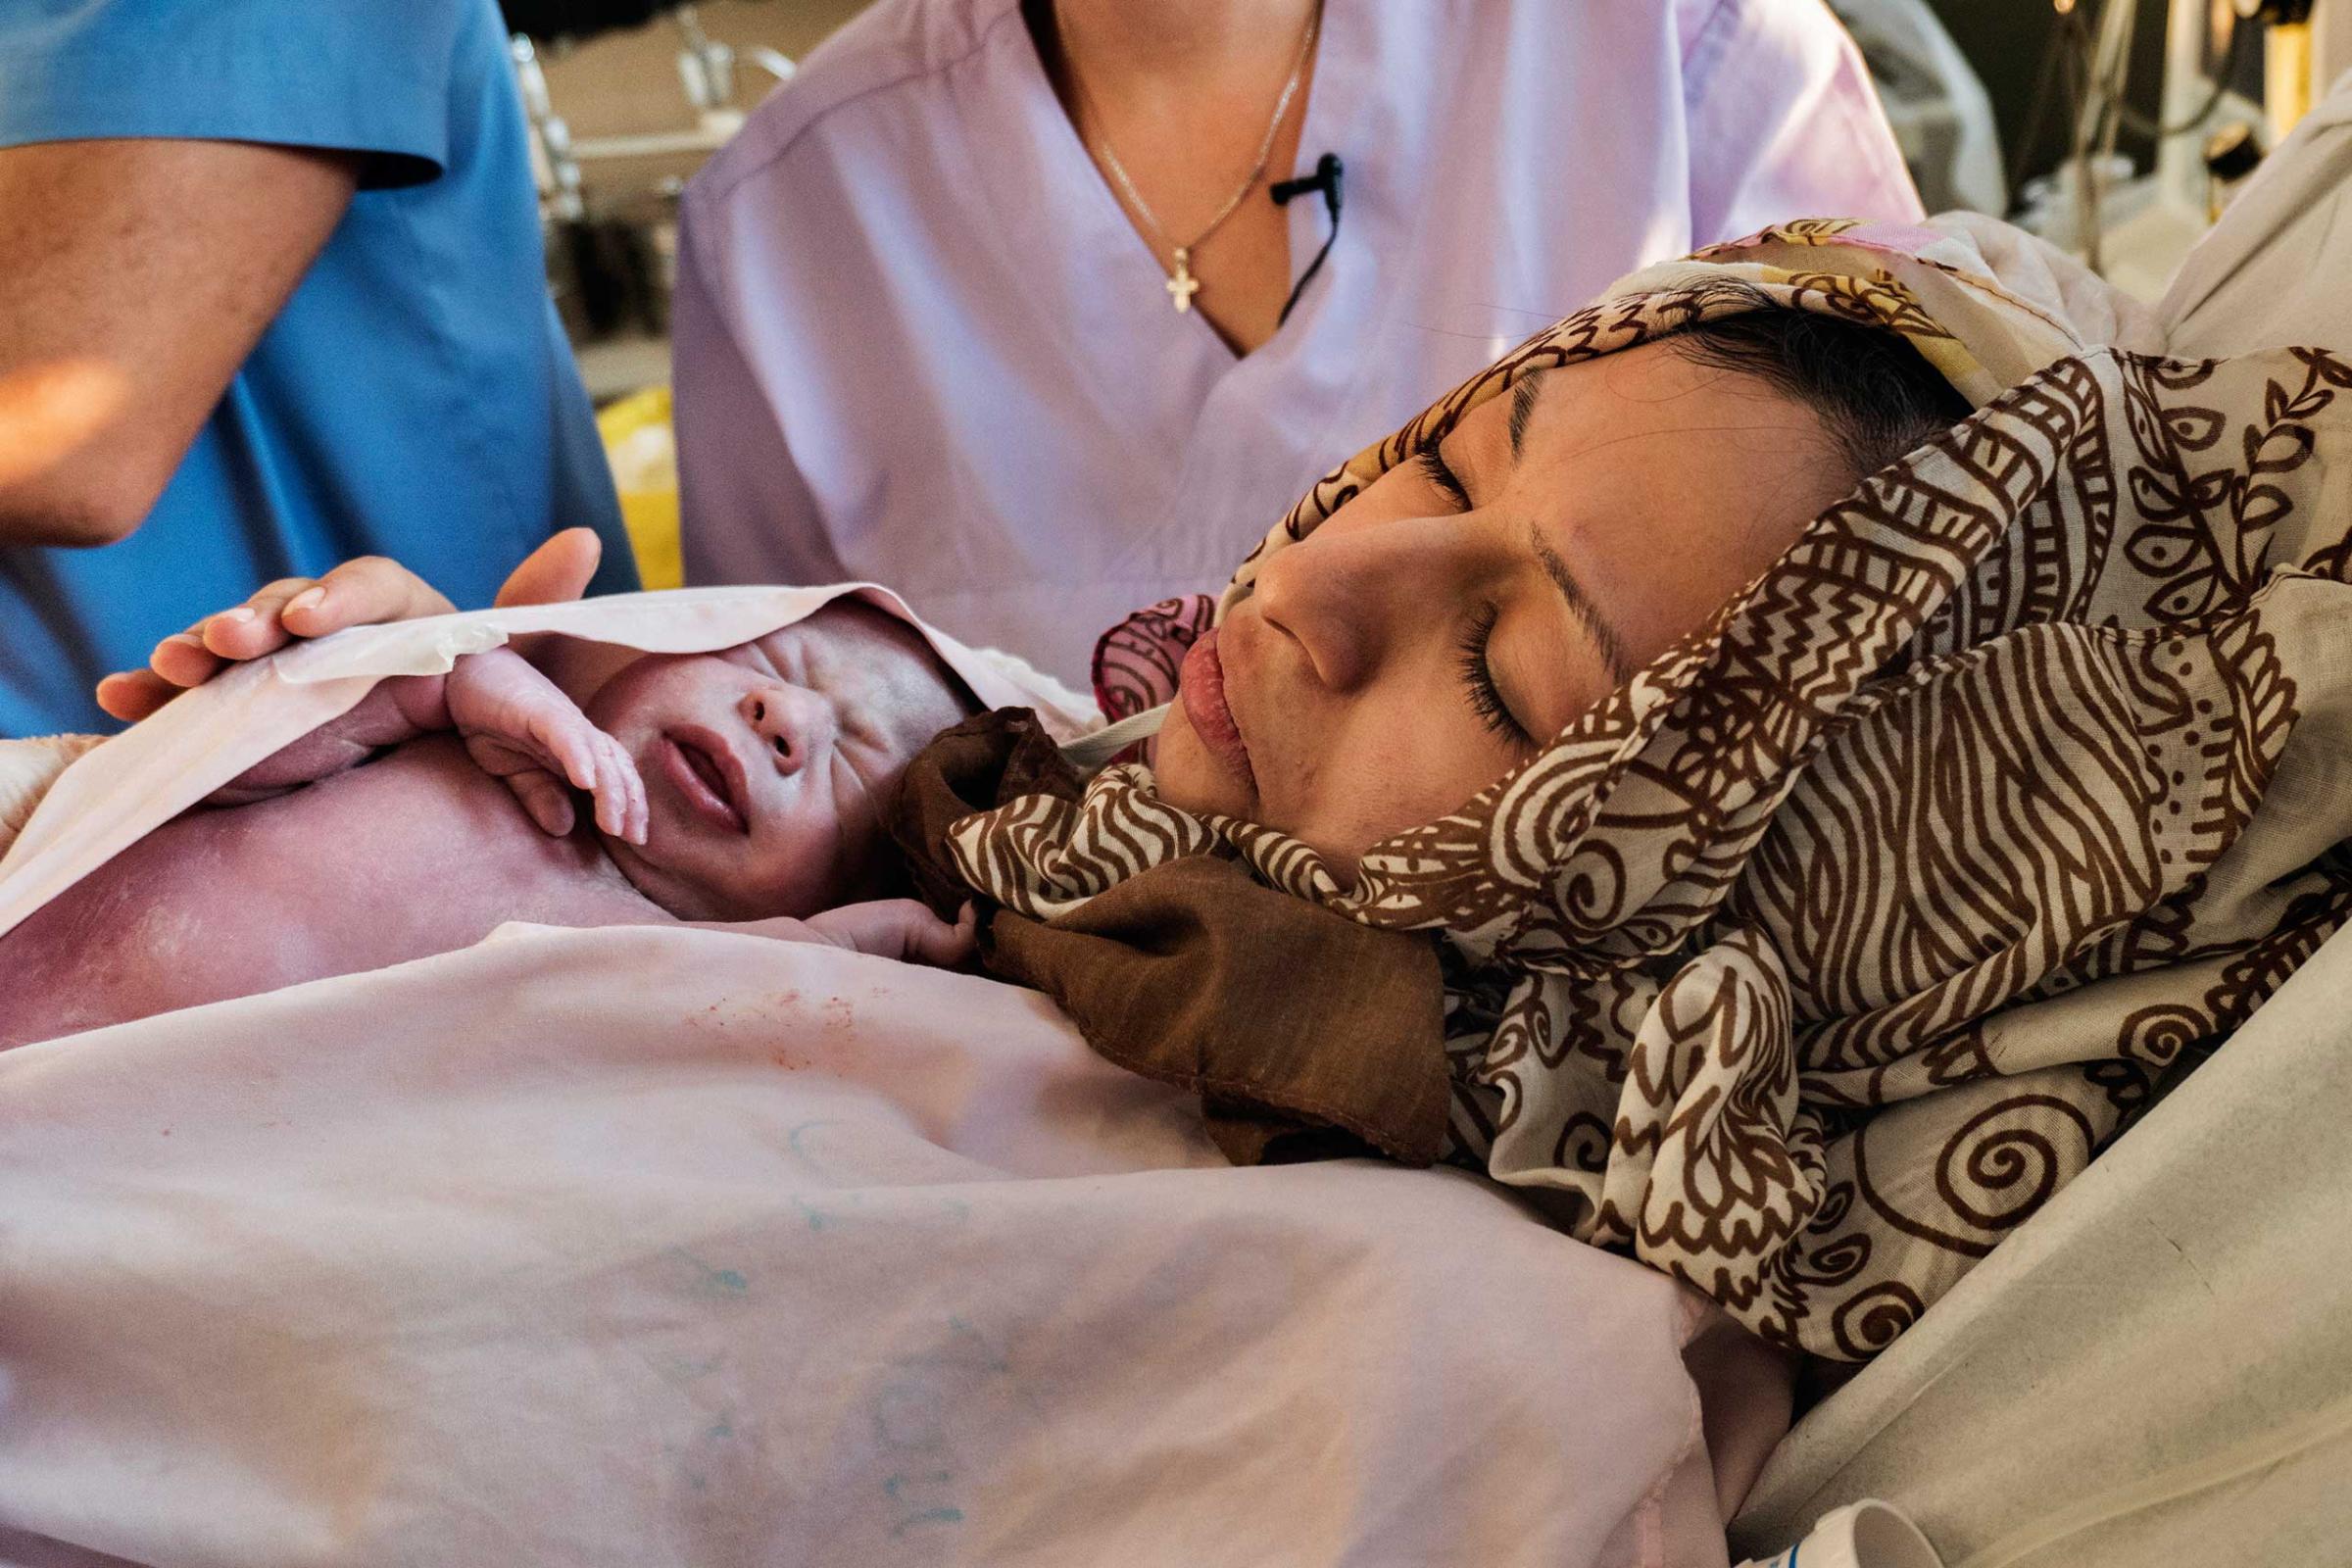 Sanaa Mattar Razzouk, 23, from Deir ez-Zor, Syria, gave birth to her second child on Sept. 27, 2016, Her husband, Hamza Adnan Khzam, 25, said: “My first child was born as a refugee in Turkey,” ...this one in Greece. They are children of no country.” Pointing to the sky, he added, “they are God’s children now, and God will take care of them.”